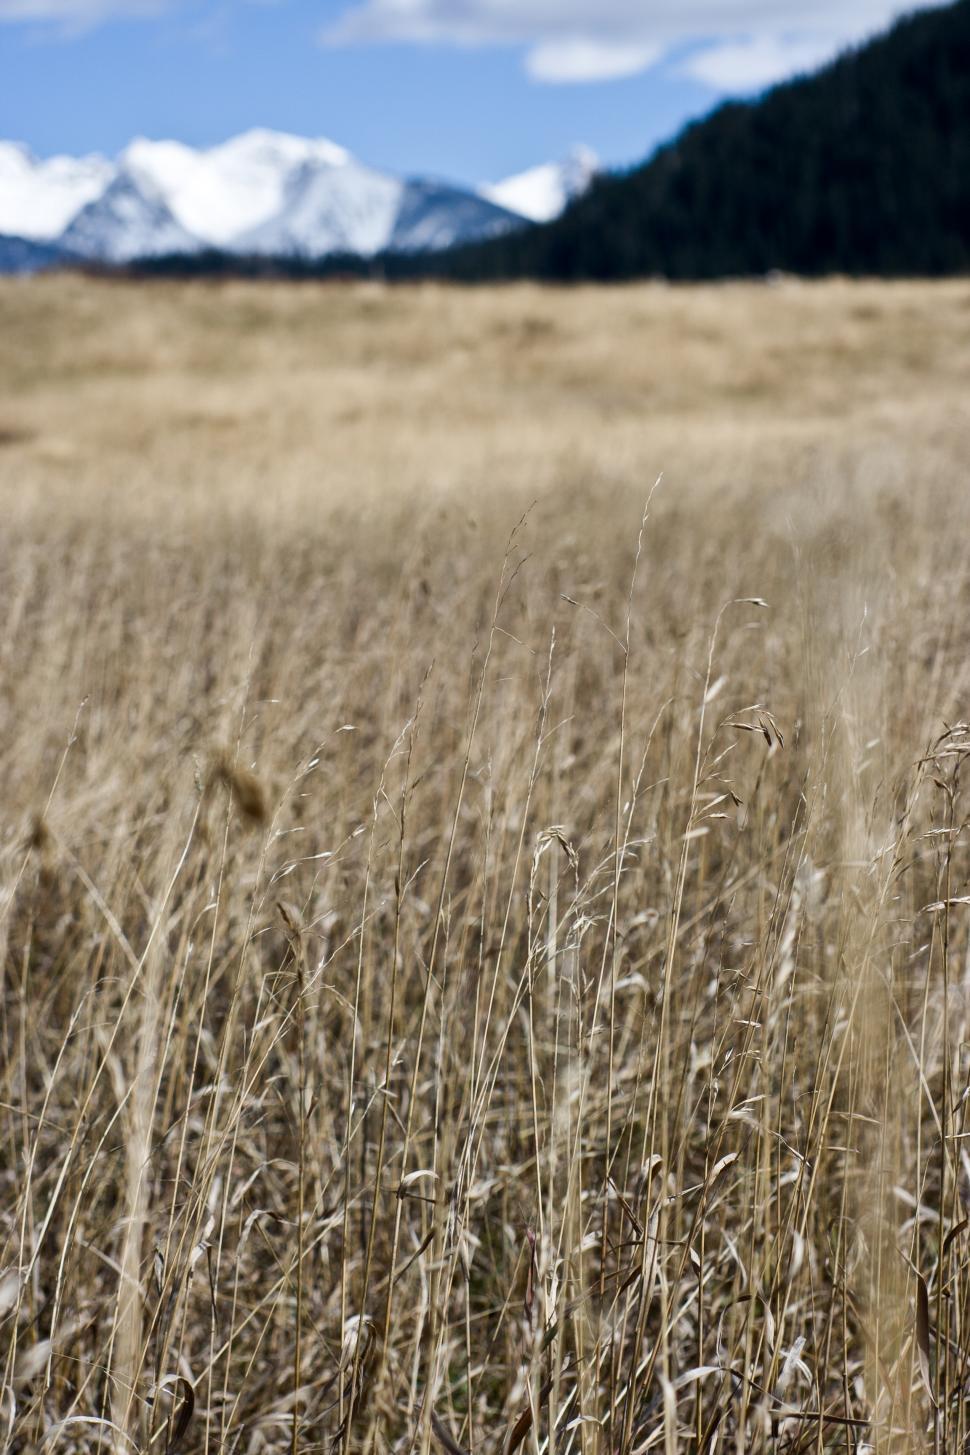 Download Free Stock Photo of Field of Tall Grass in Mountain Valley 